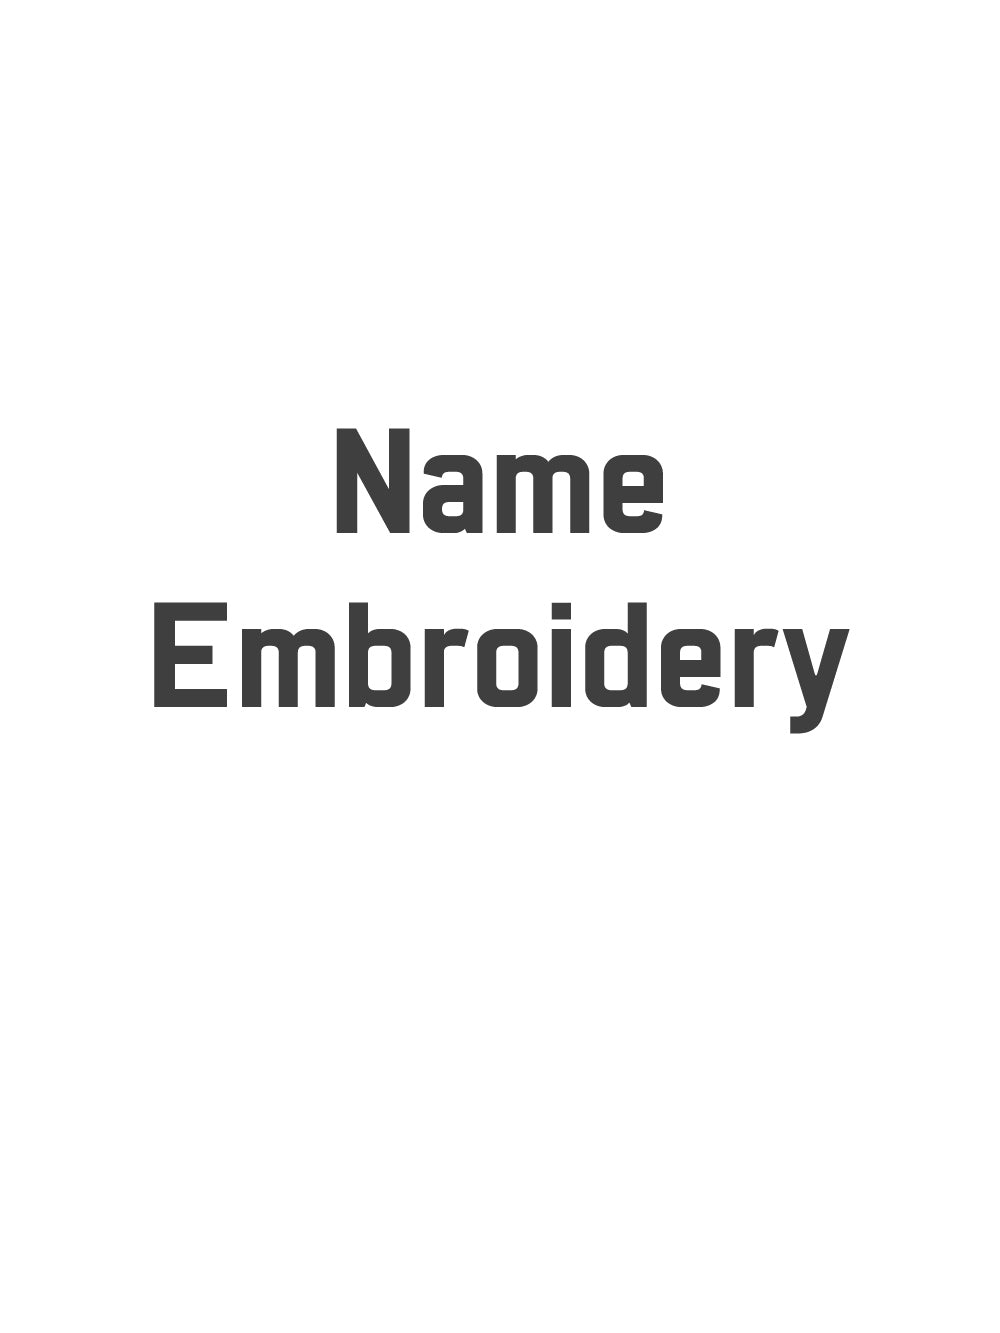 NAME EMBROIDERY